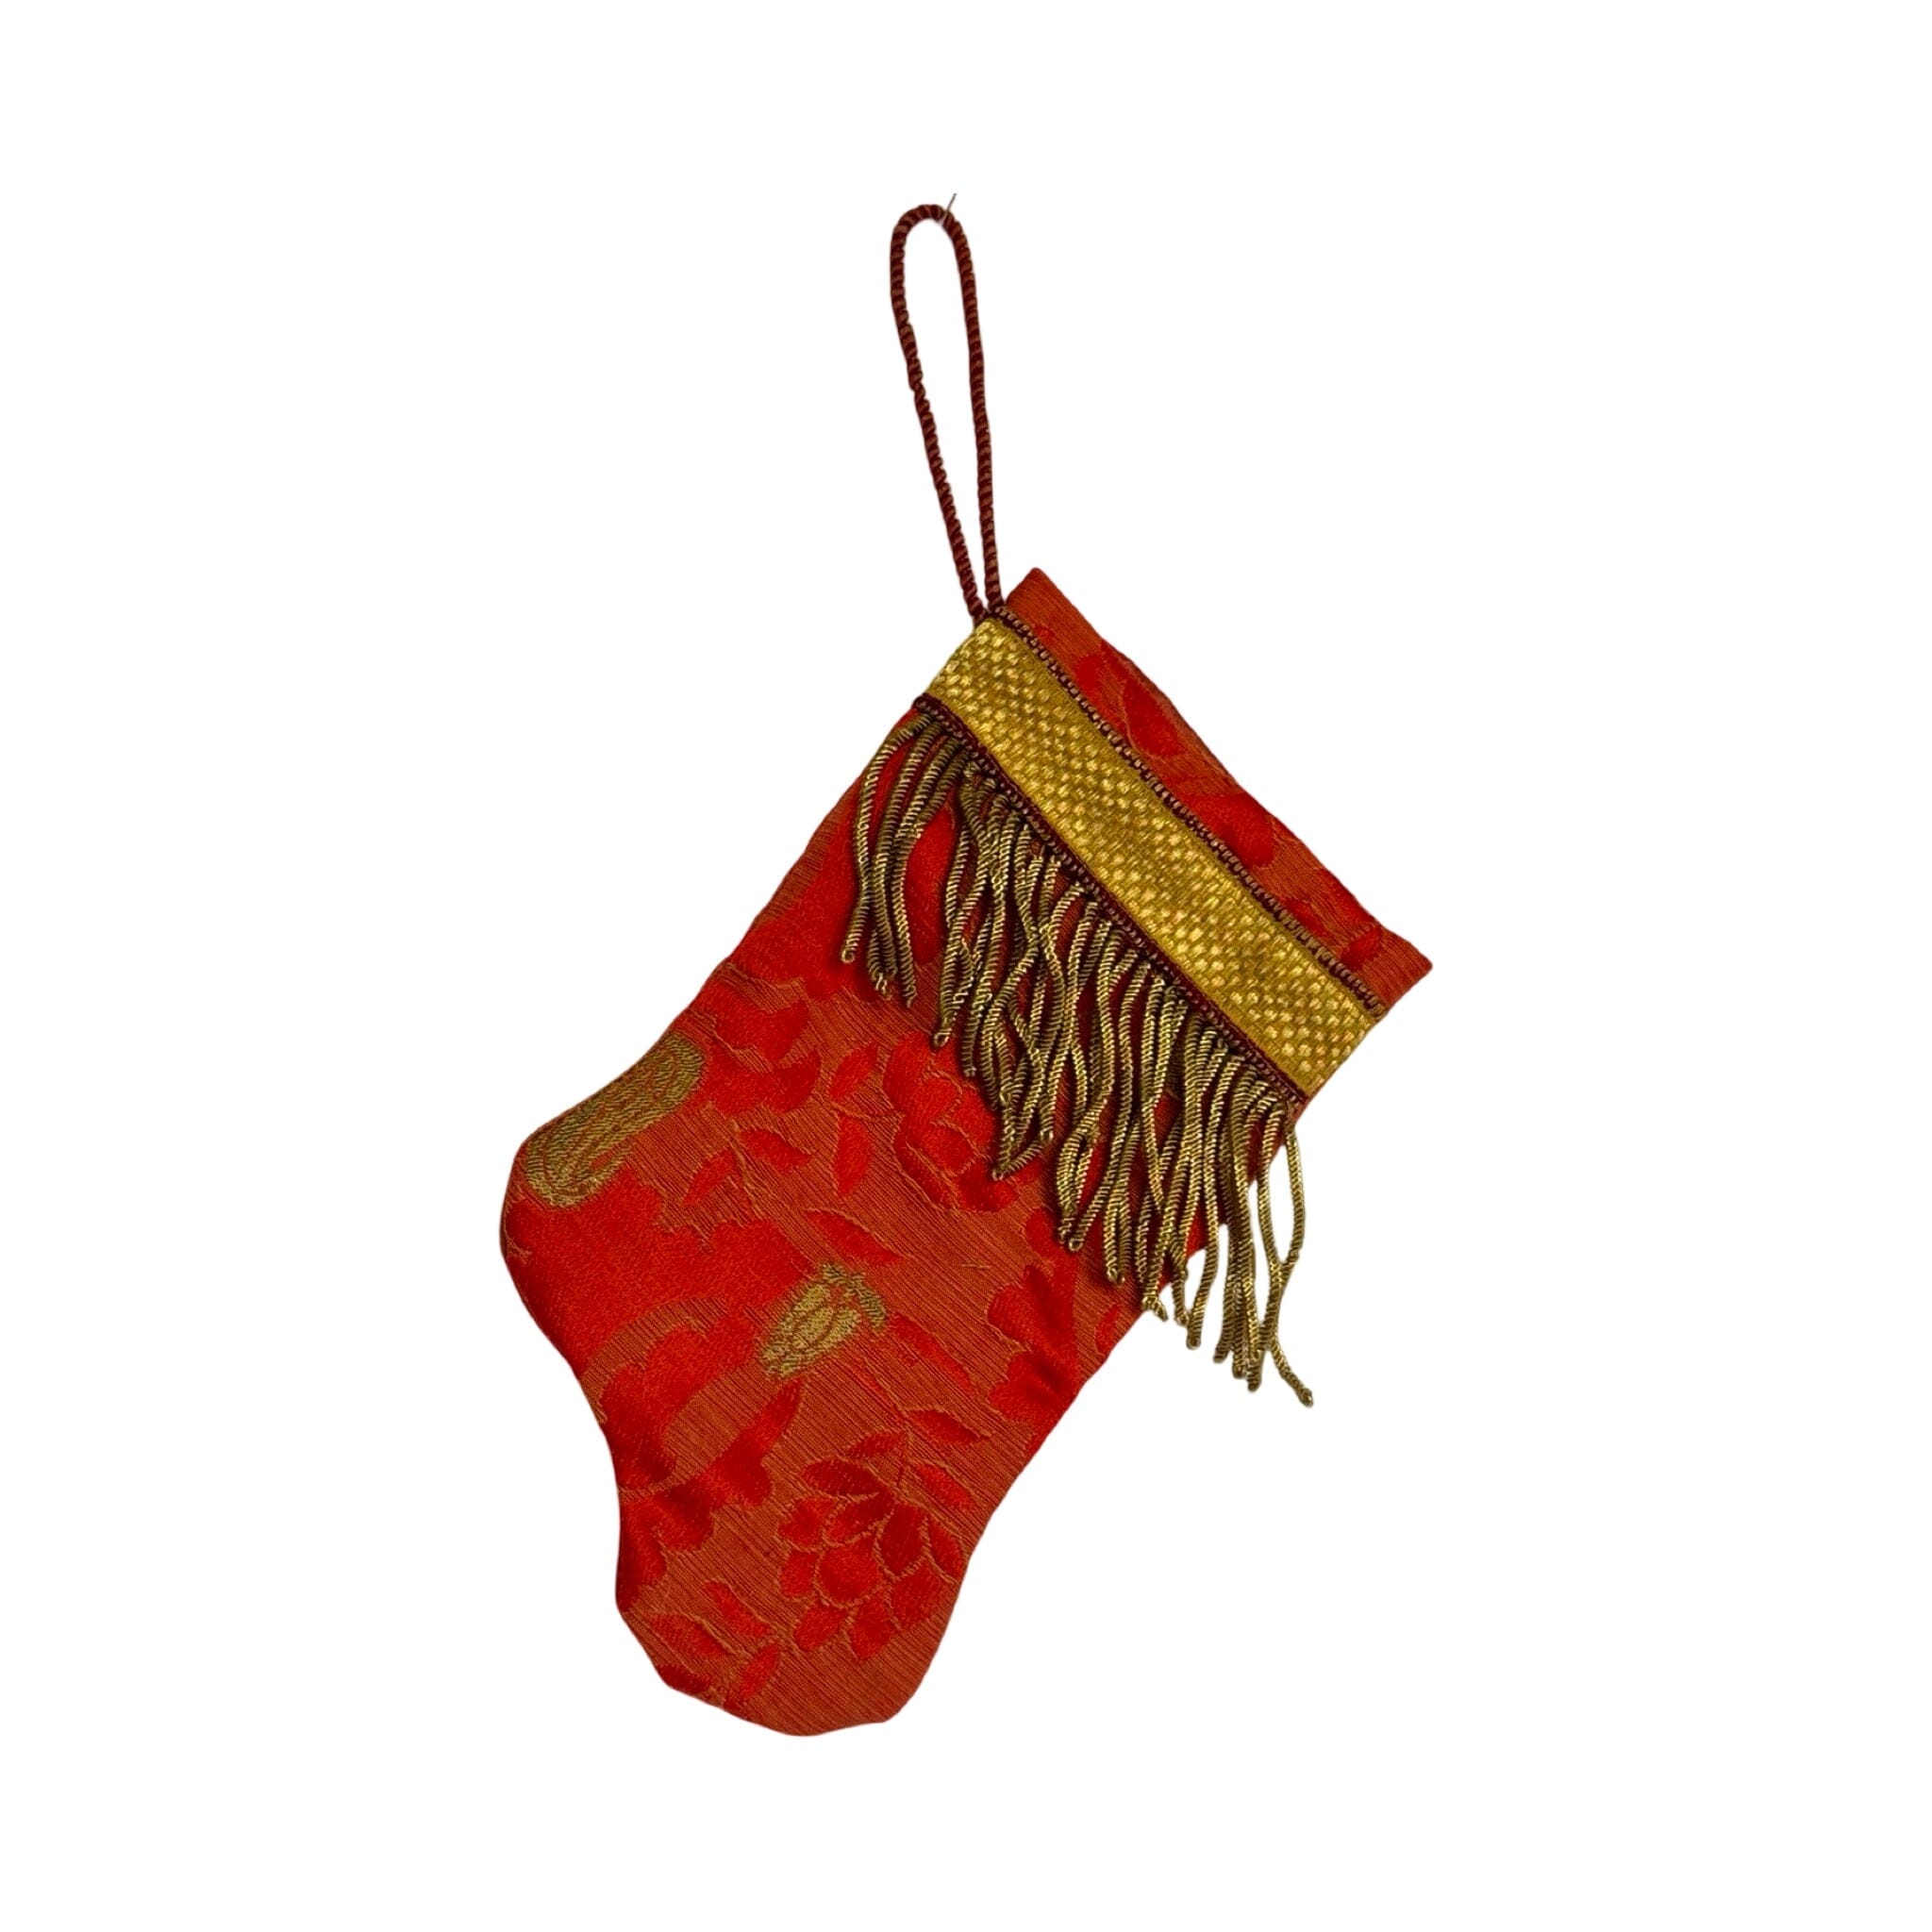 Handmade Mini Stocking Made From Vintage Fabric and Trims- Red and Gold Ornament B. Viz Design J 